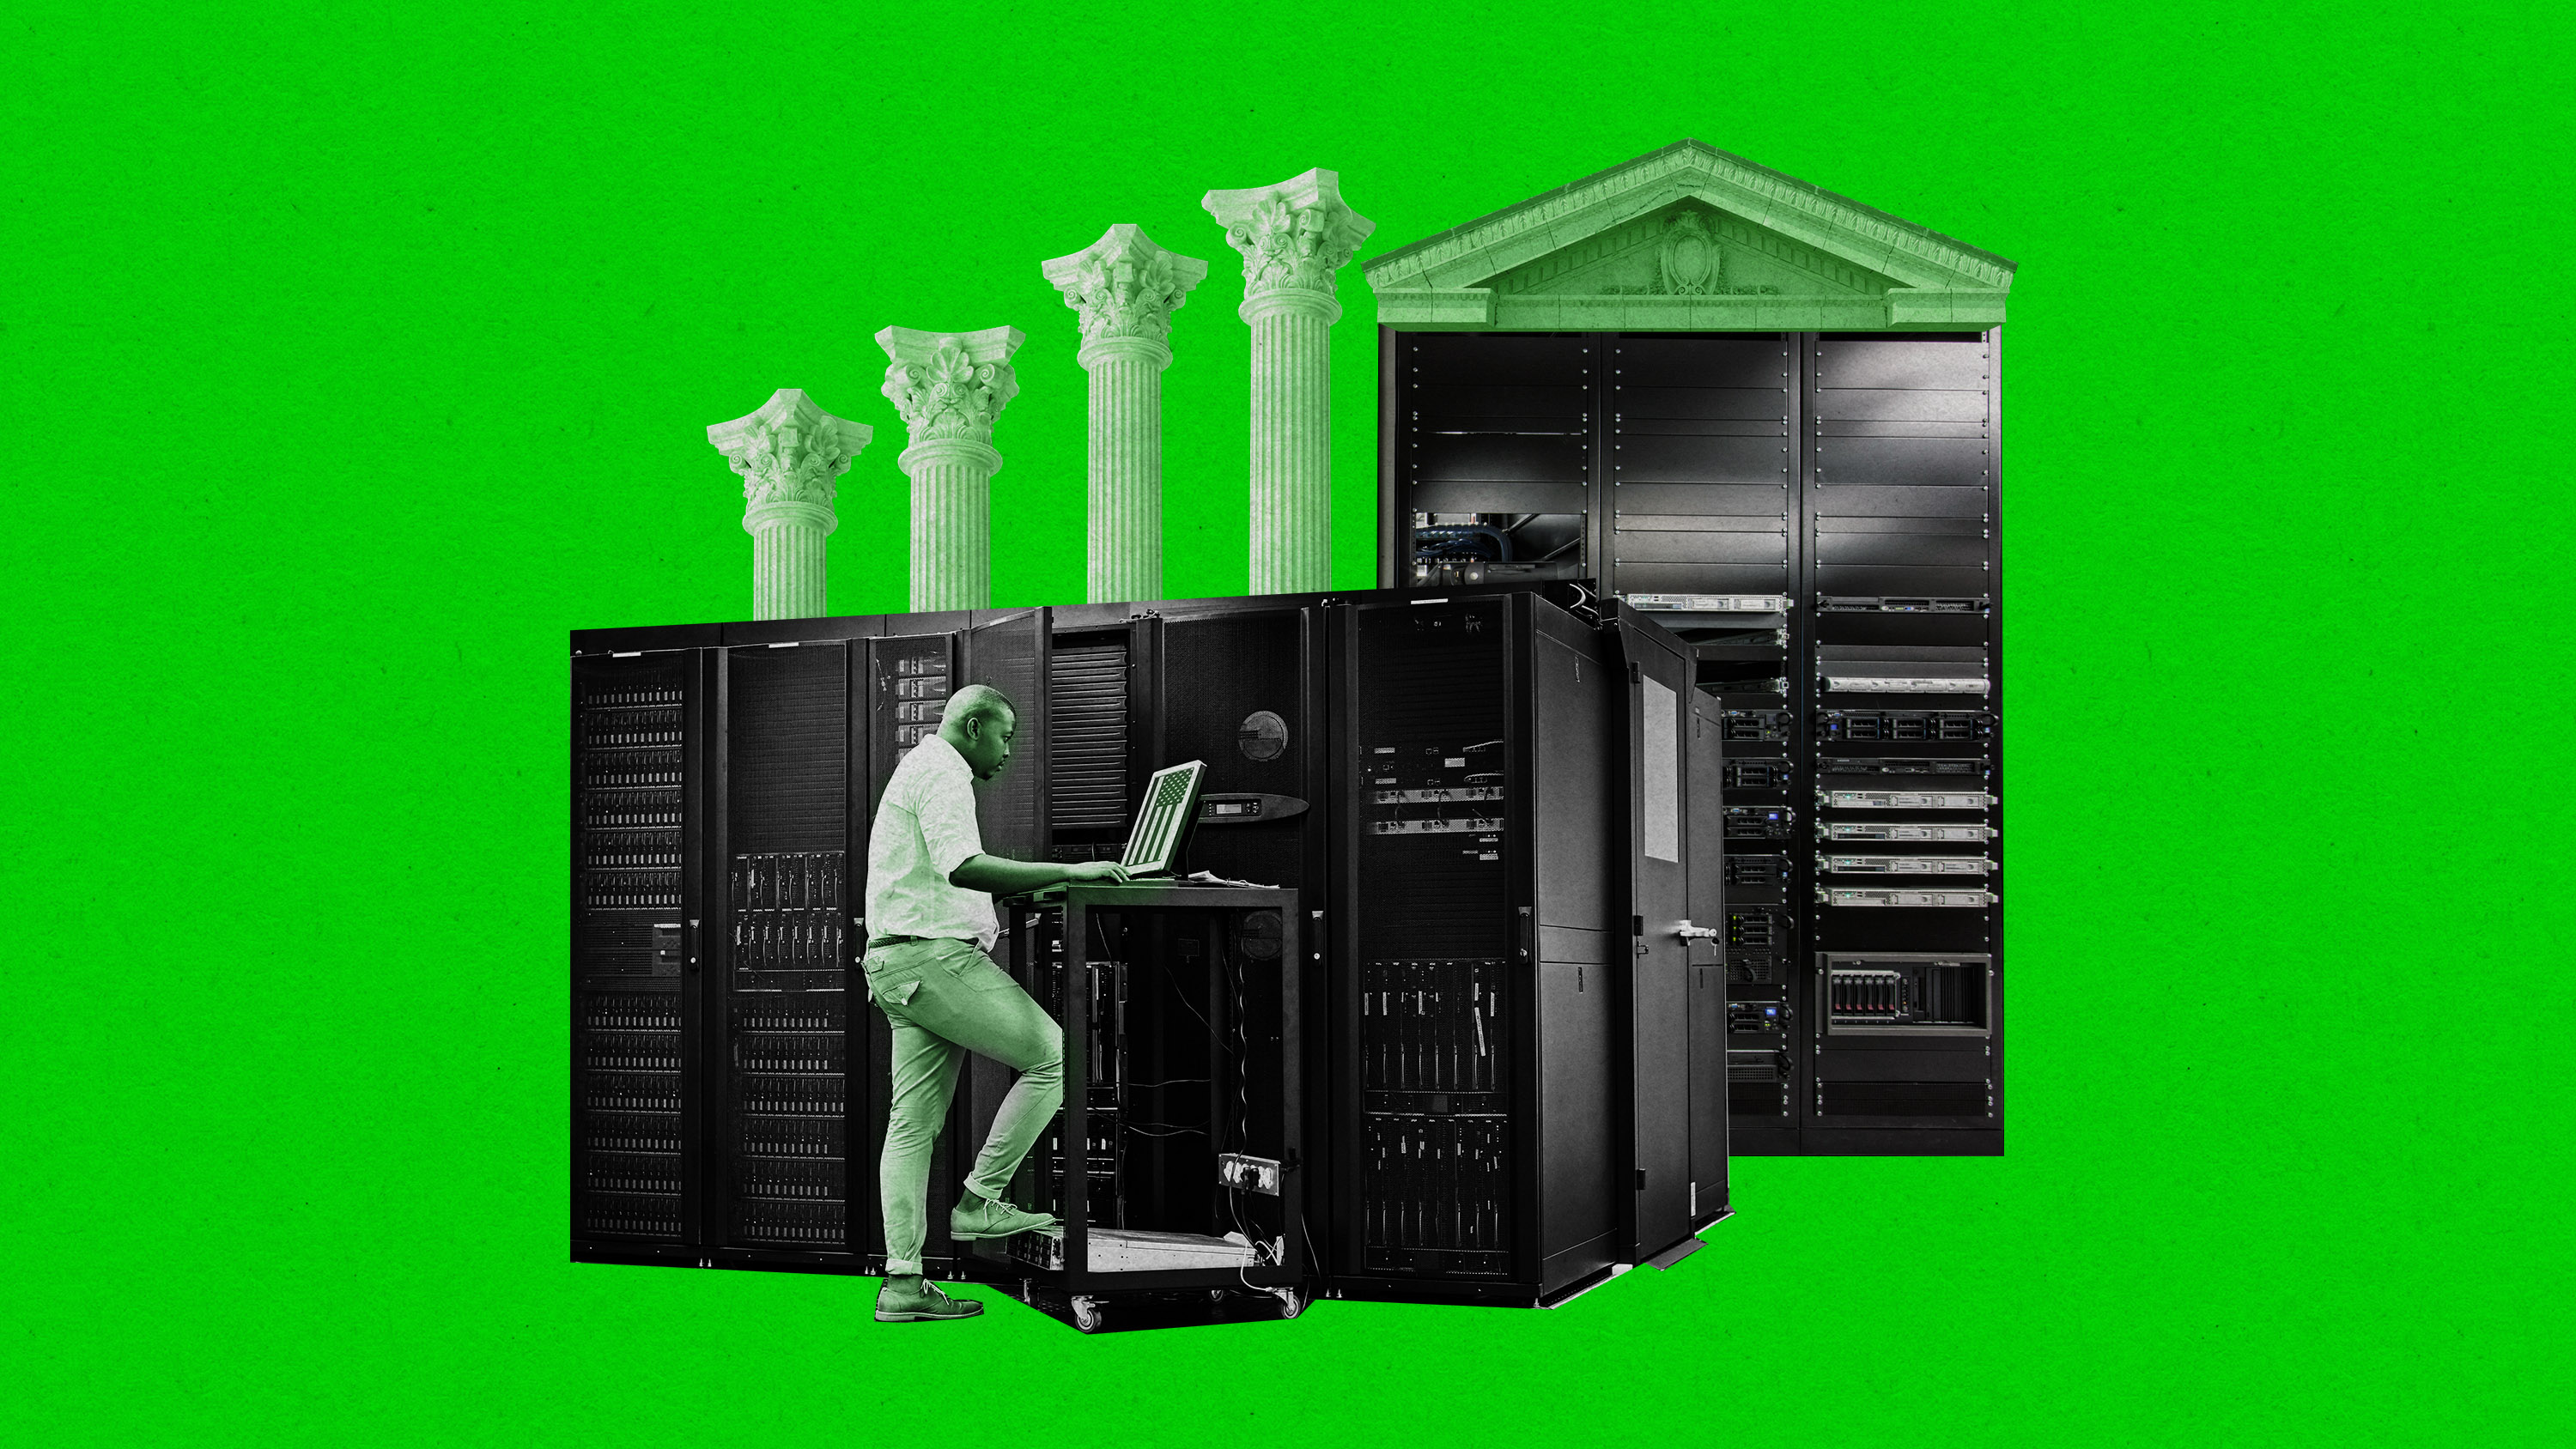 greek columns and pediment on server racks while a researcher looks at a laptop on a server cart.